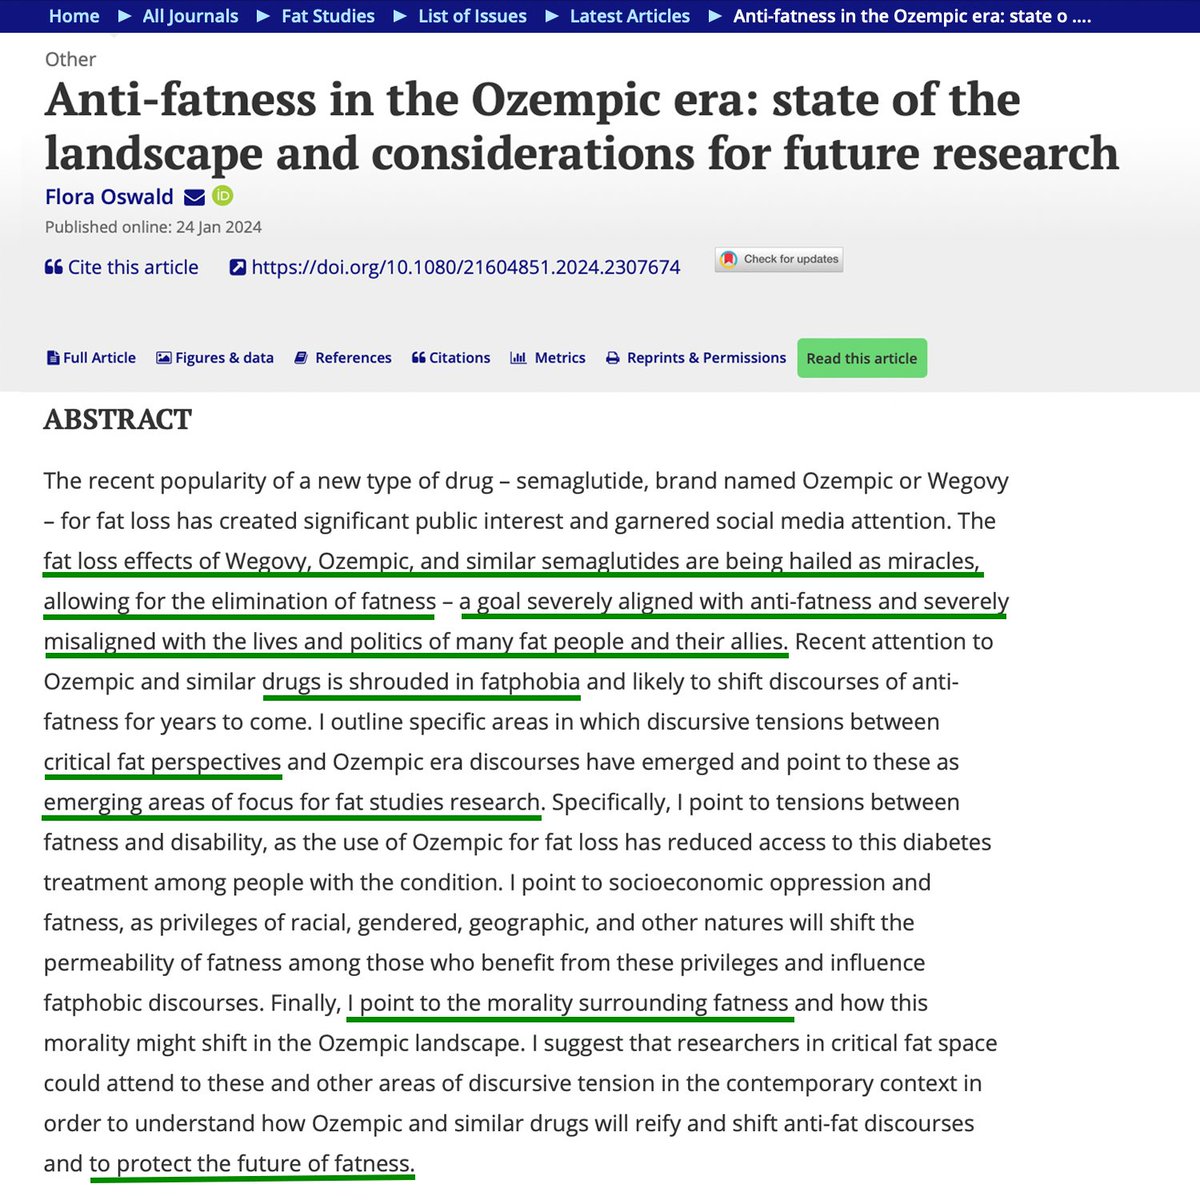 Thought I would check in with the 'fat scholars' on how they were handling all the buzz around Ozempic. Nevermind the health benefits of losing weight; Ozempic is fatphobic. More 'critical fat perspectives' are needed to 'protect the future of fatness.'